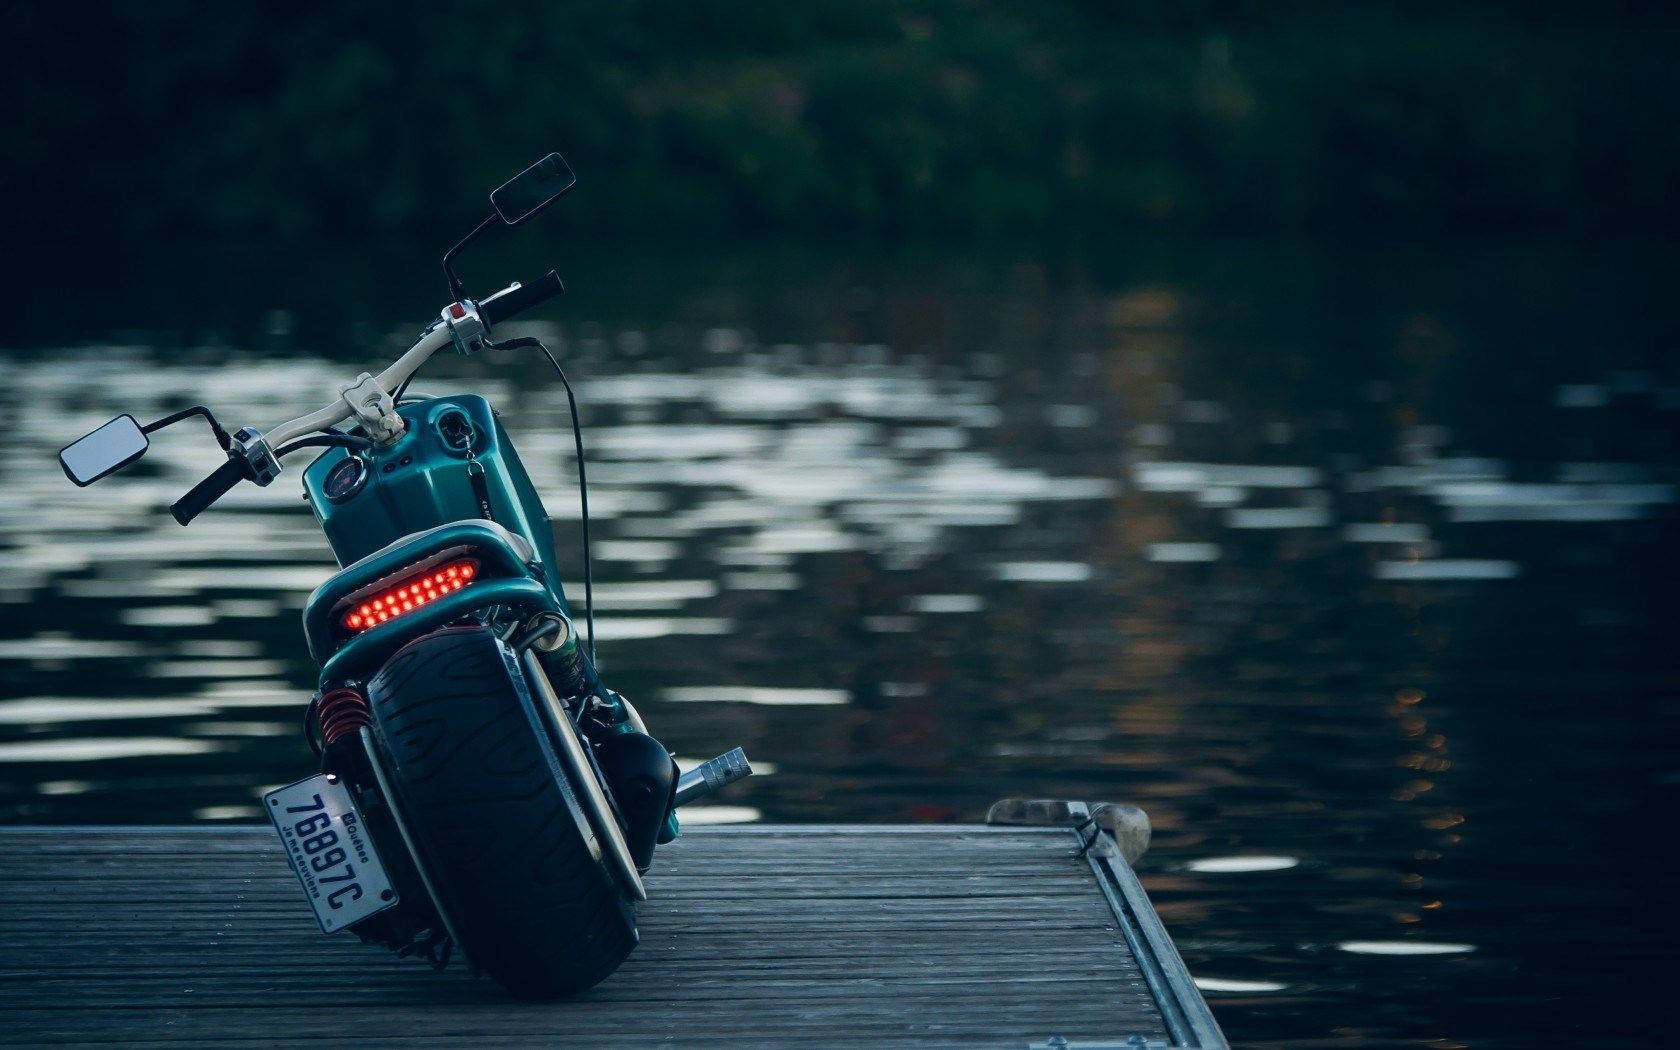 HD wallpaper of black motorcycle parked near body of water. 